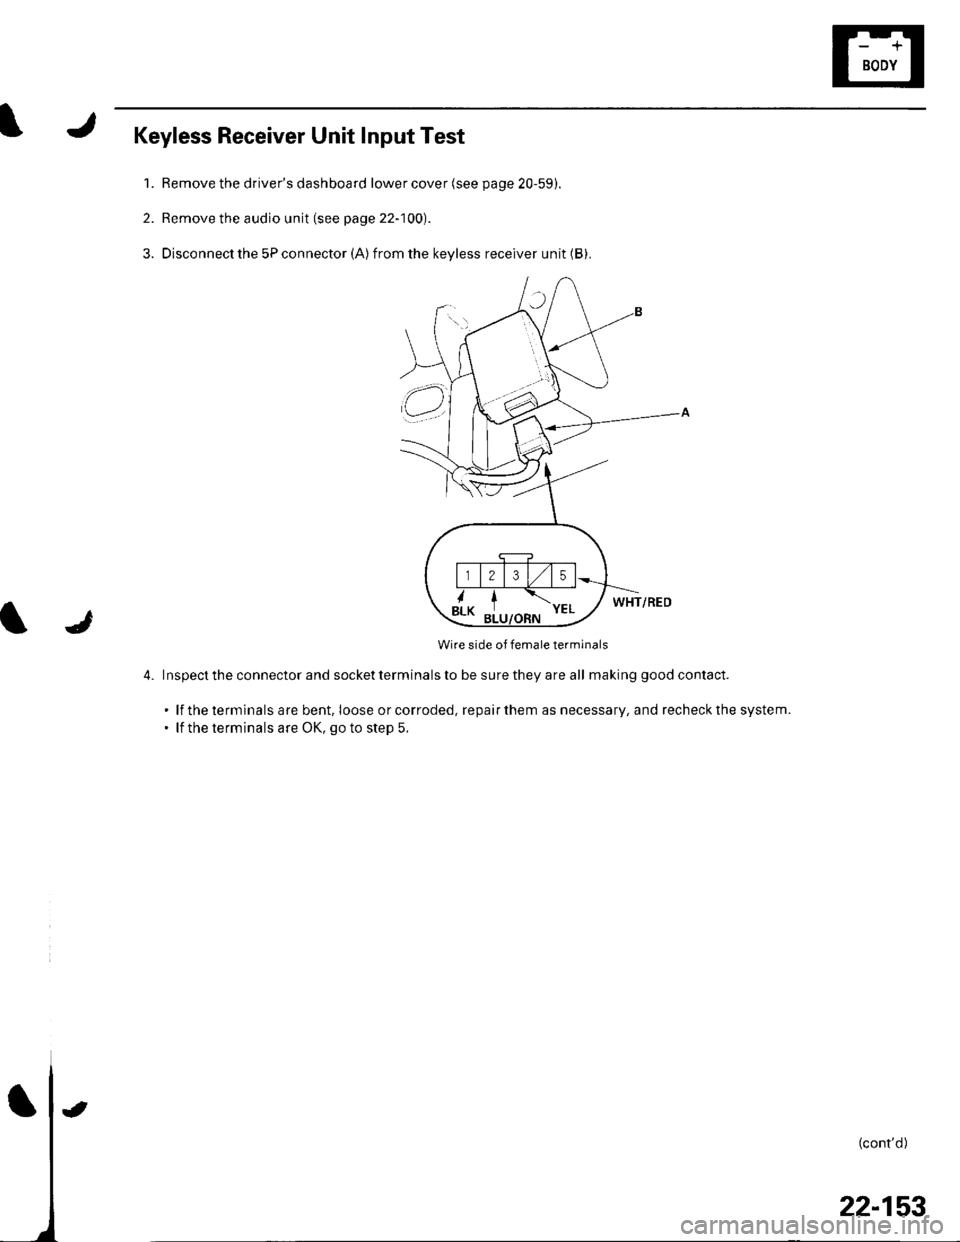 HONDA CIVIC 2003 7.G Workshop Manual Keyless Receiver Unit Input Test
1. Remove the drivers dashboard lower cover (see page 20-59).
2. Remove the audio unit (see page 22-100).
3. Disconnect the 5P connector (A)from the keyless receiver 